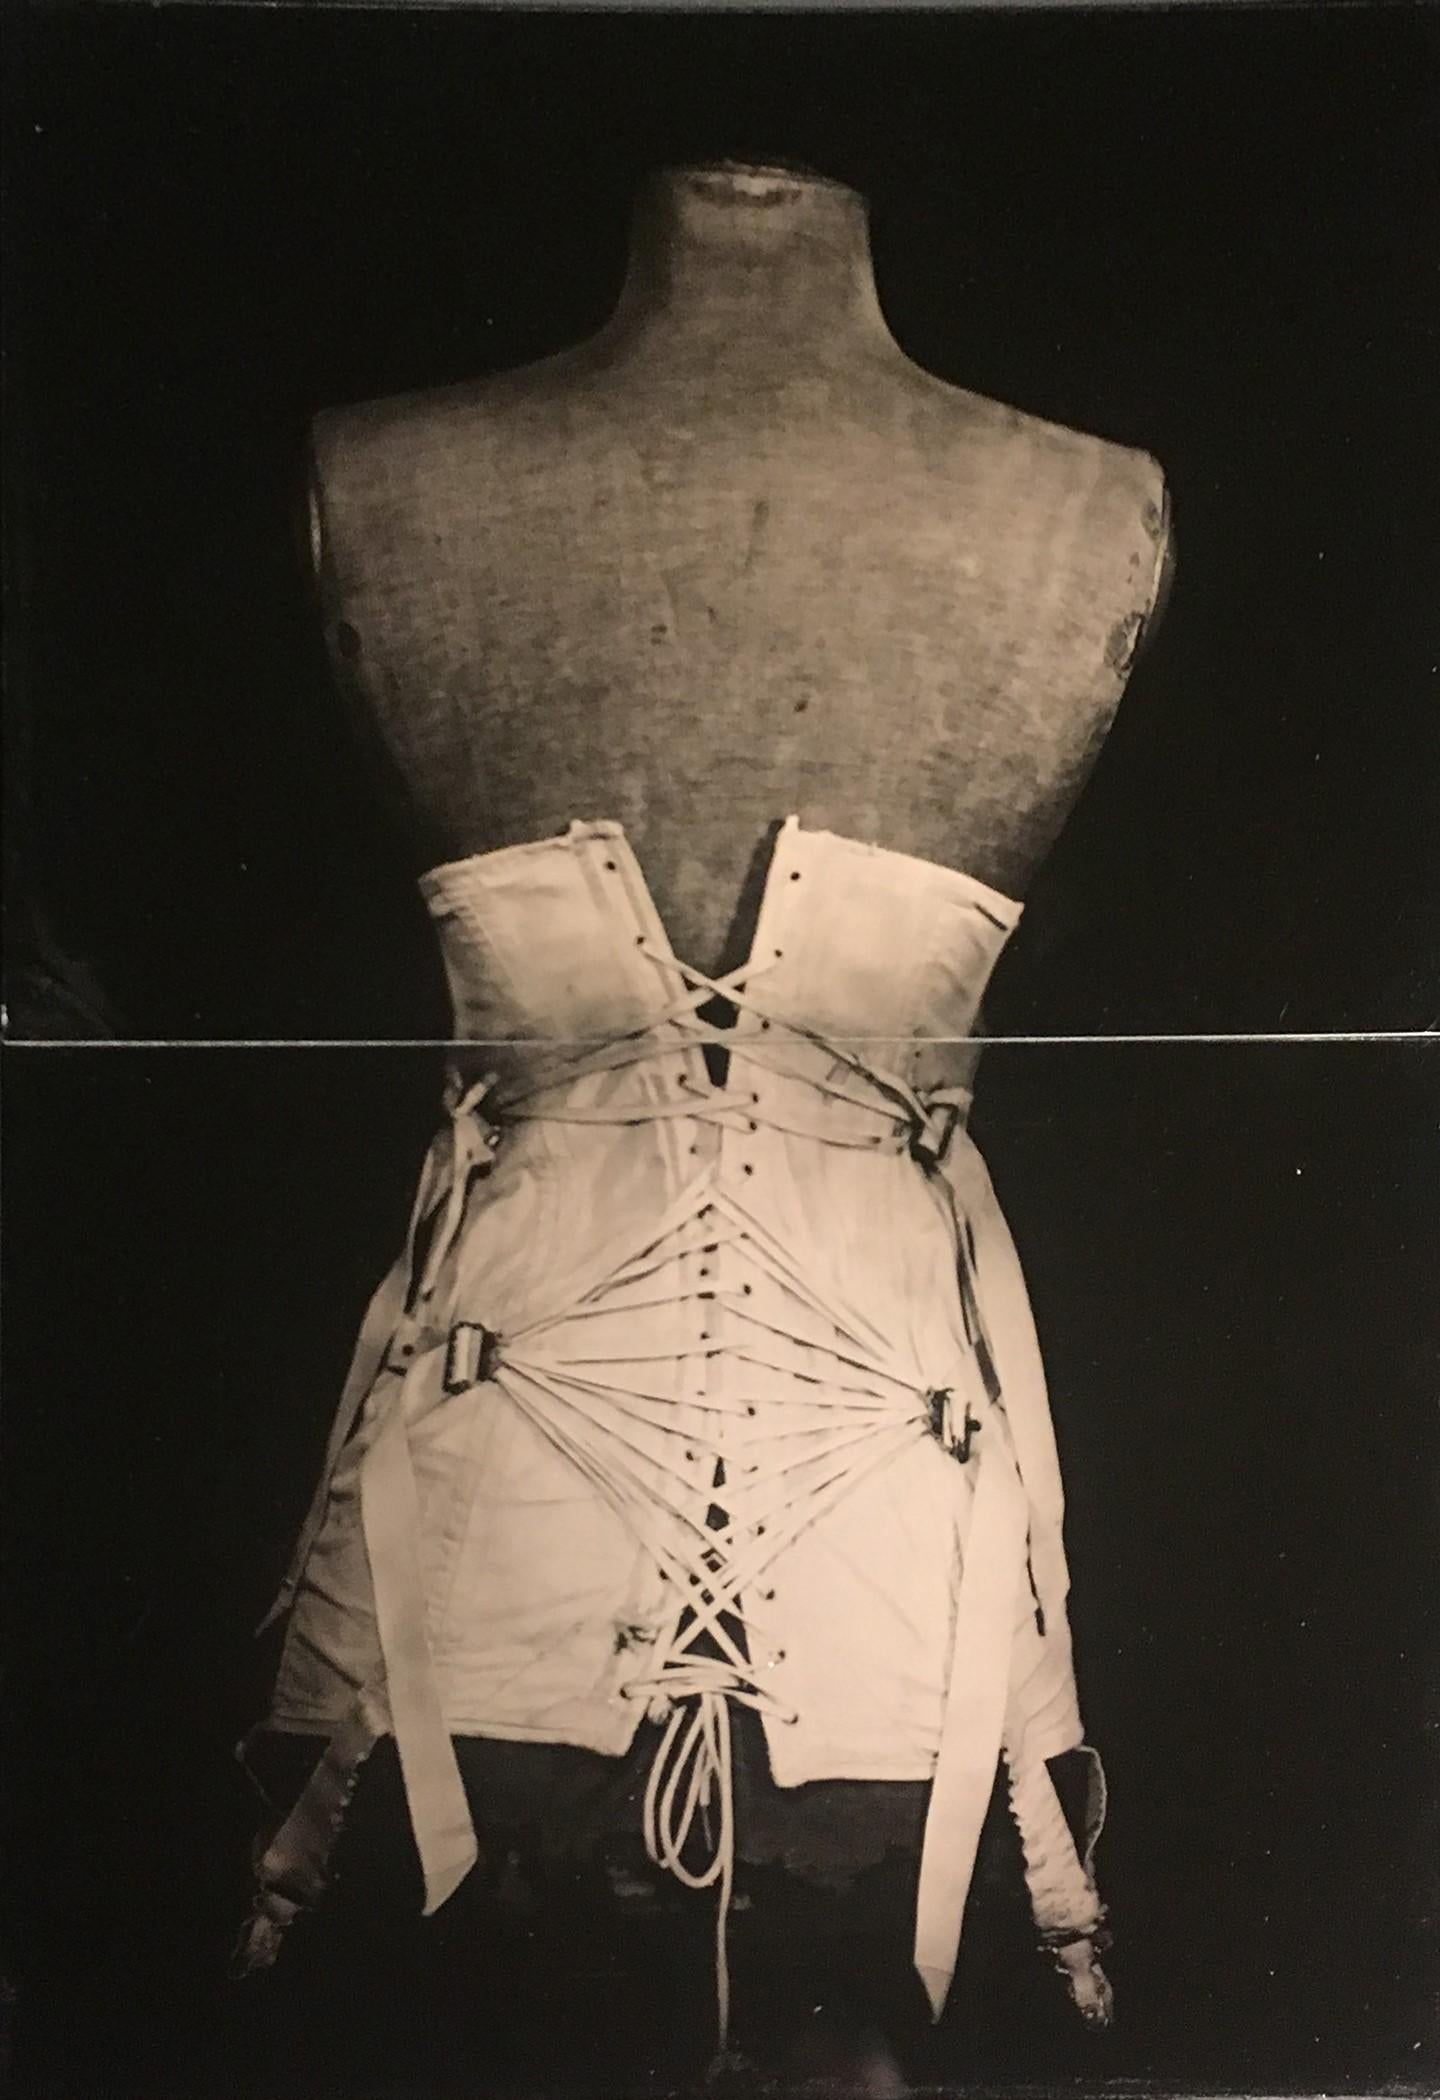 My Grandmother's Corset (Vintage Still Life Photograph of a White Corset)